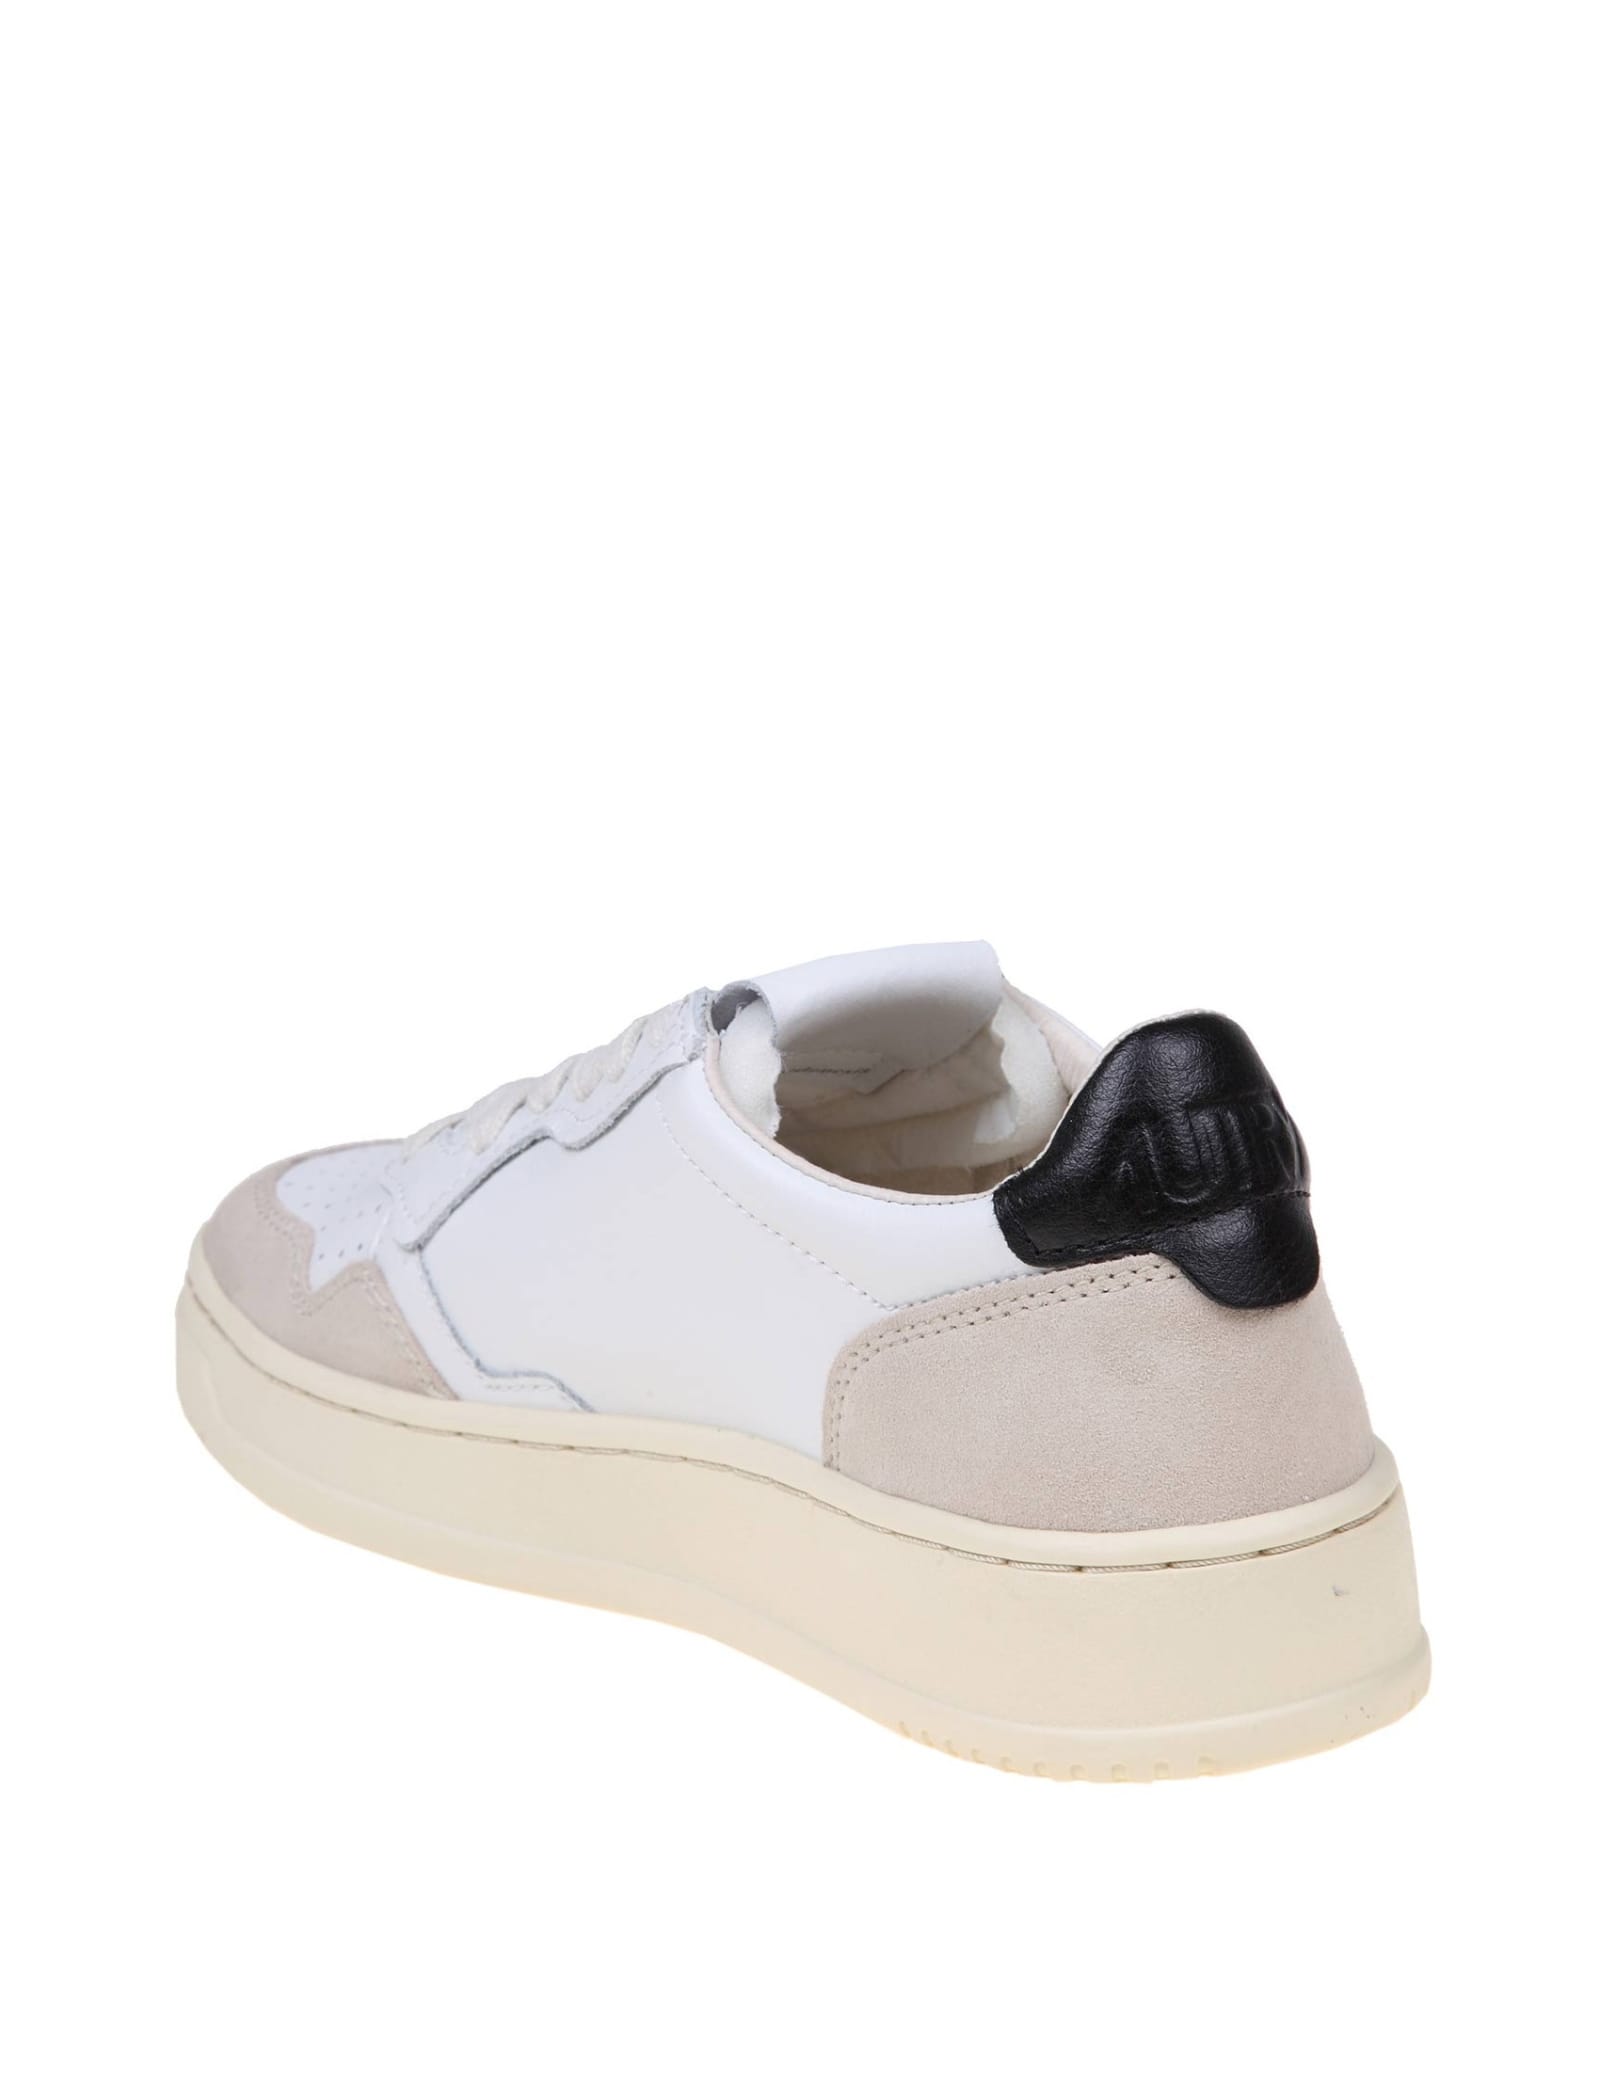 Shop Autry Sneakers In Black And White Leather And Suede In Bianco+nero